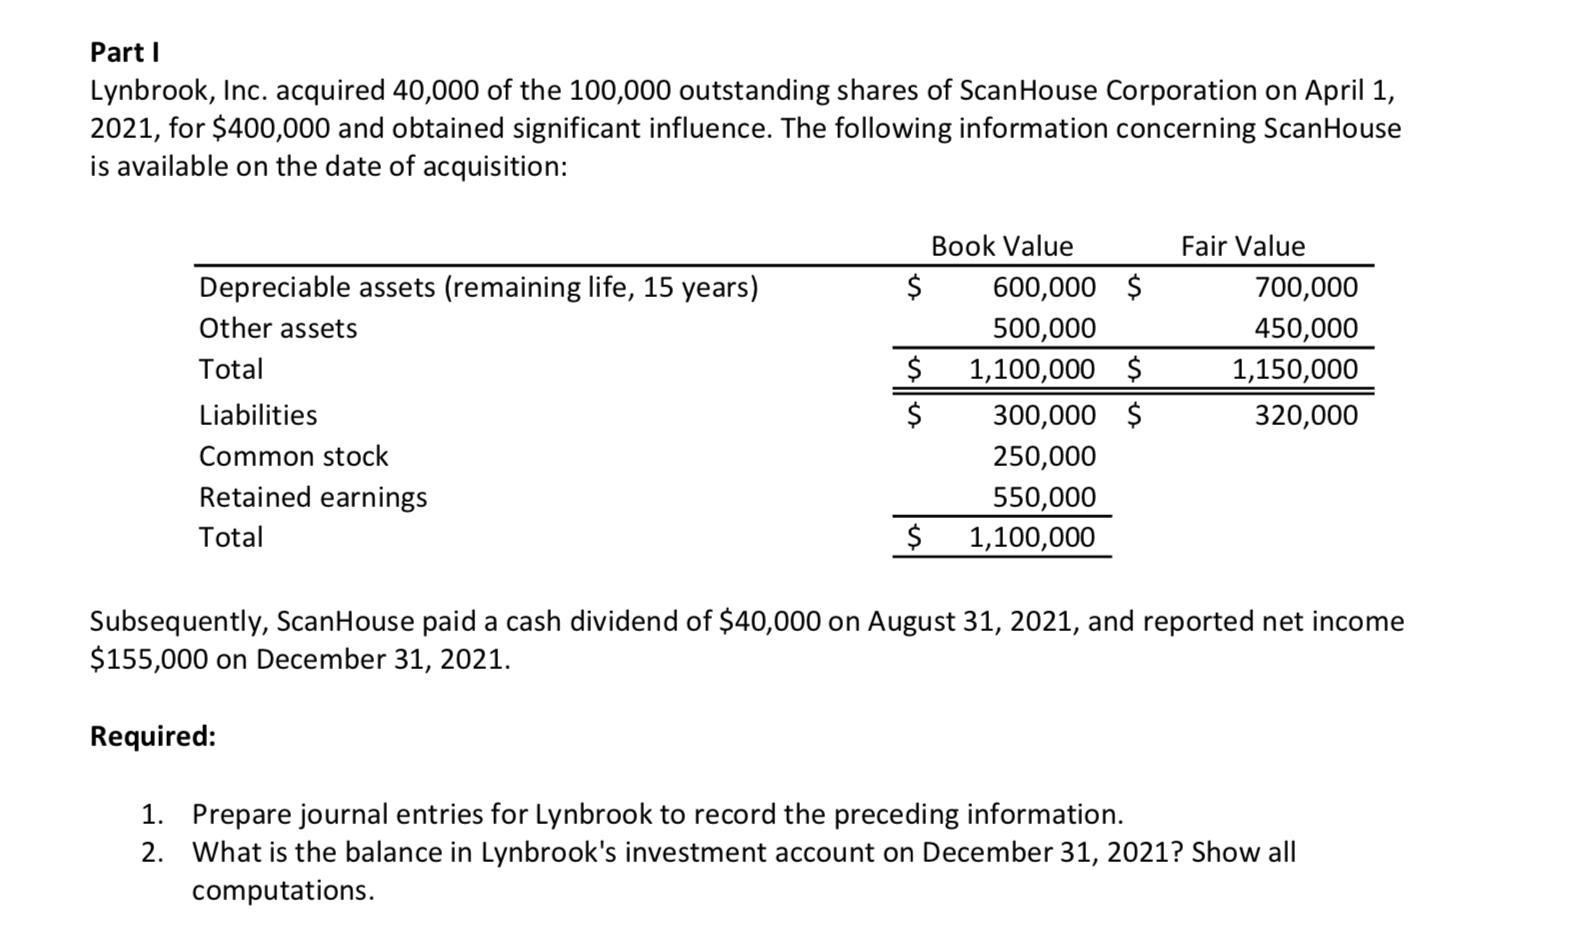 Part 1 Lynbrook, Inc. acquired 40,000 of the 100,000 outstanding shares of Scan House Corporation on April 1, 2021, for $400,